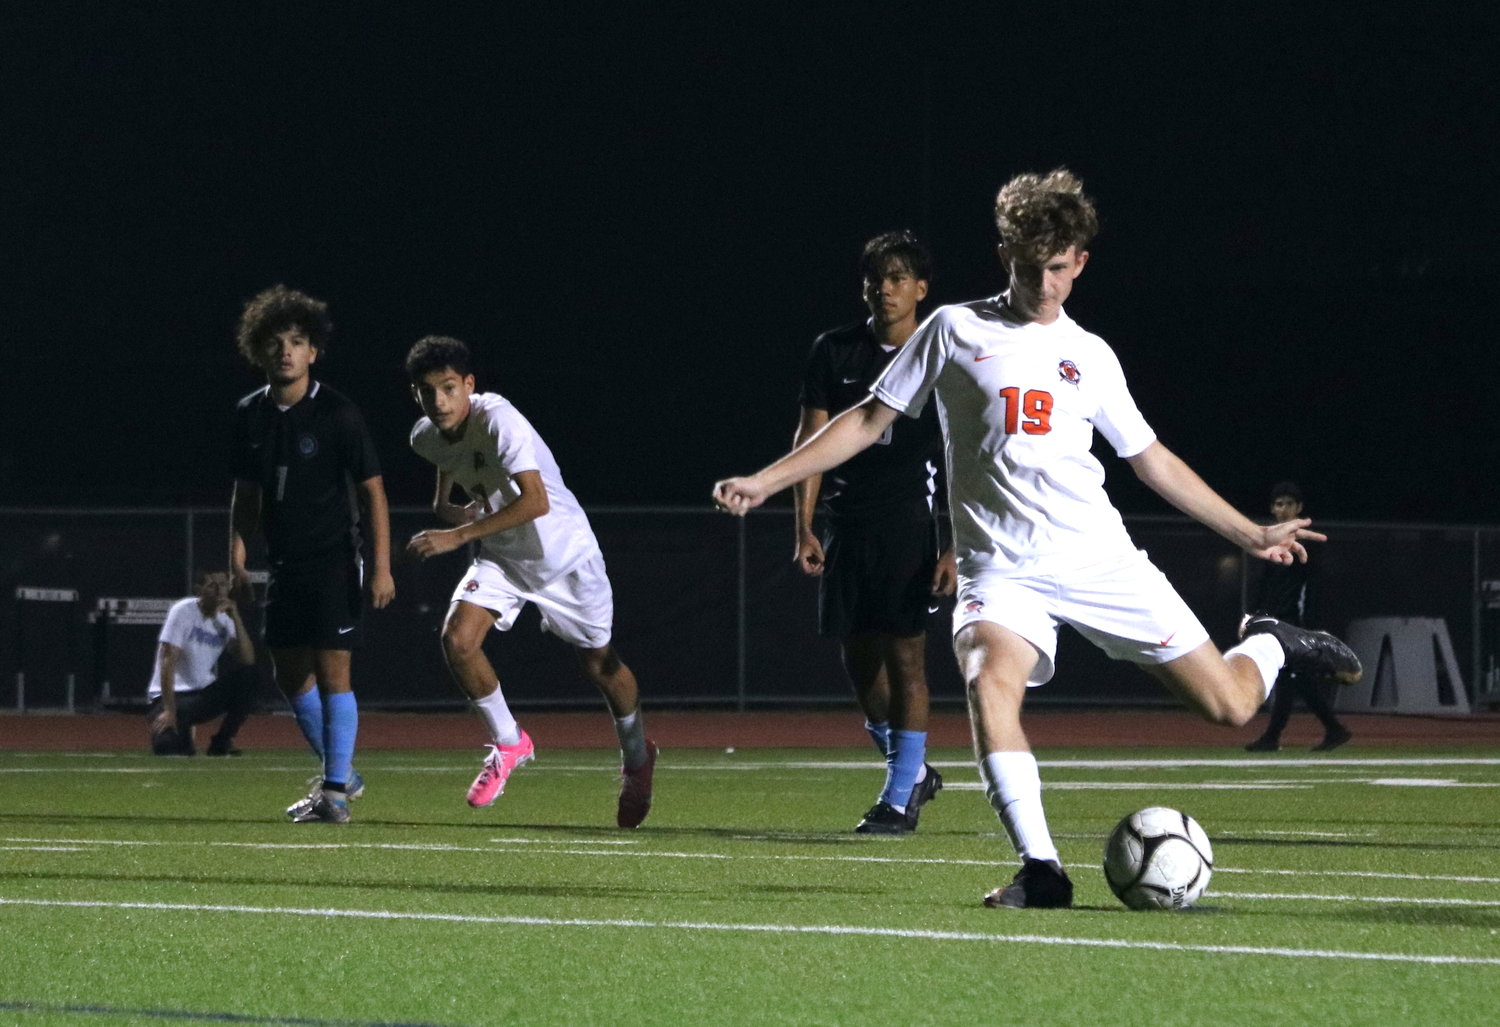 Sebastian Ranz shoots a penalty during Tuesday's District 19-6A game between Seven Lakes and Paetow at the Paetow soccer field.